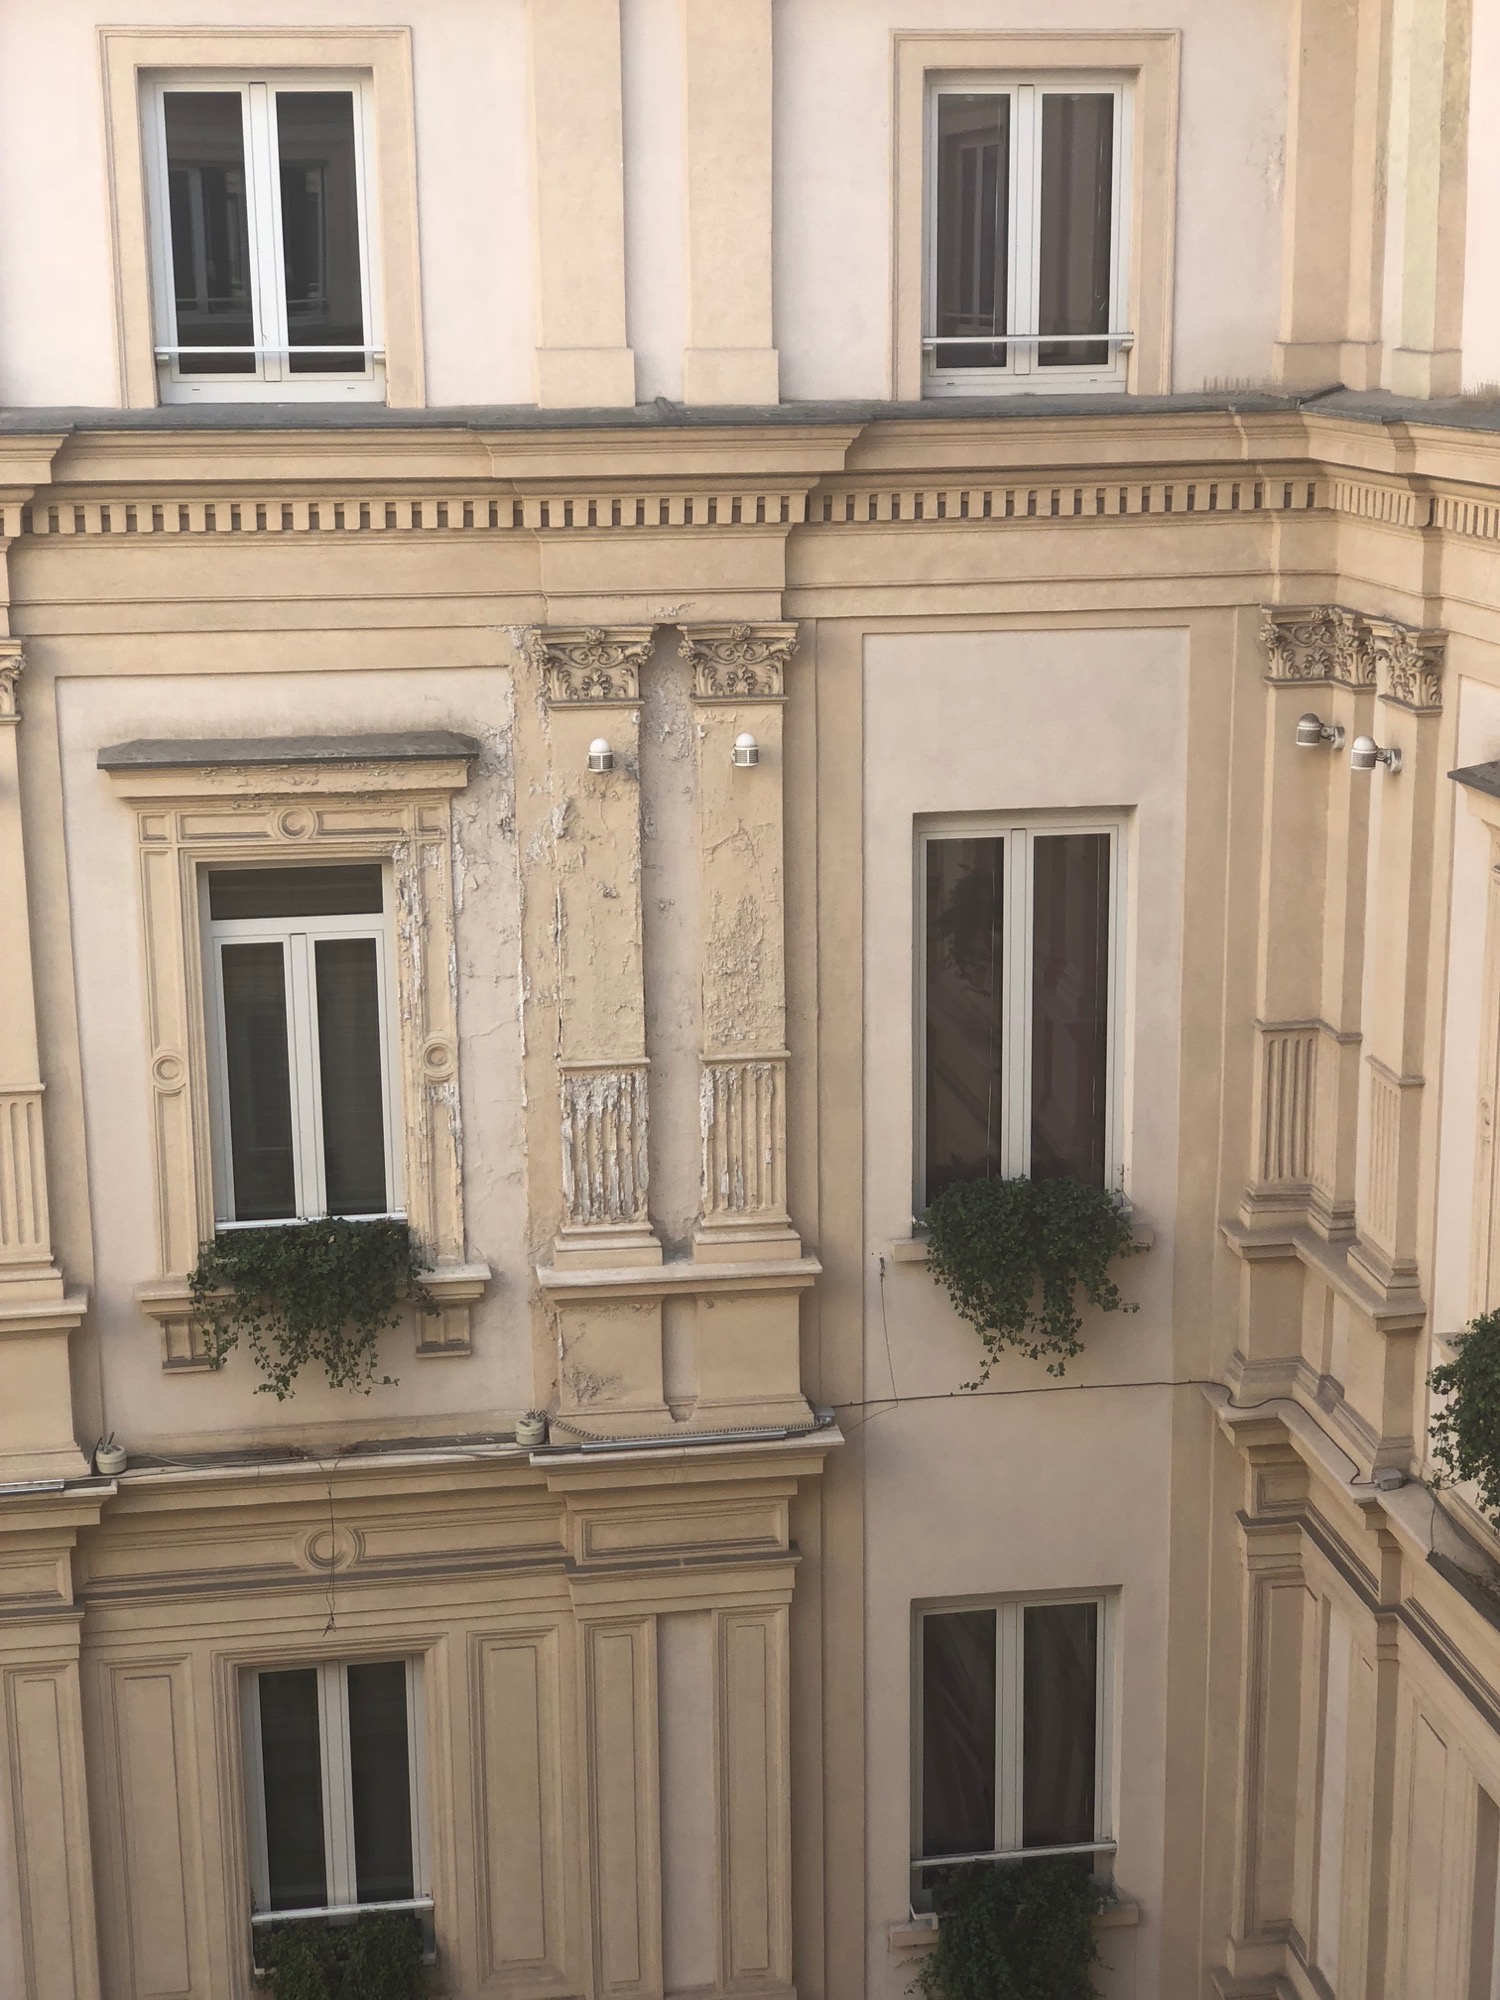 a building with plants on the windows